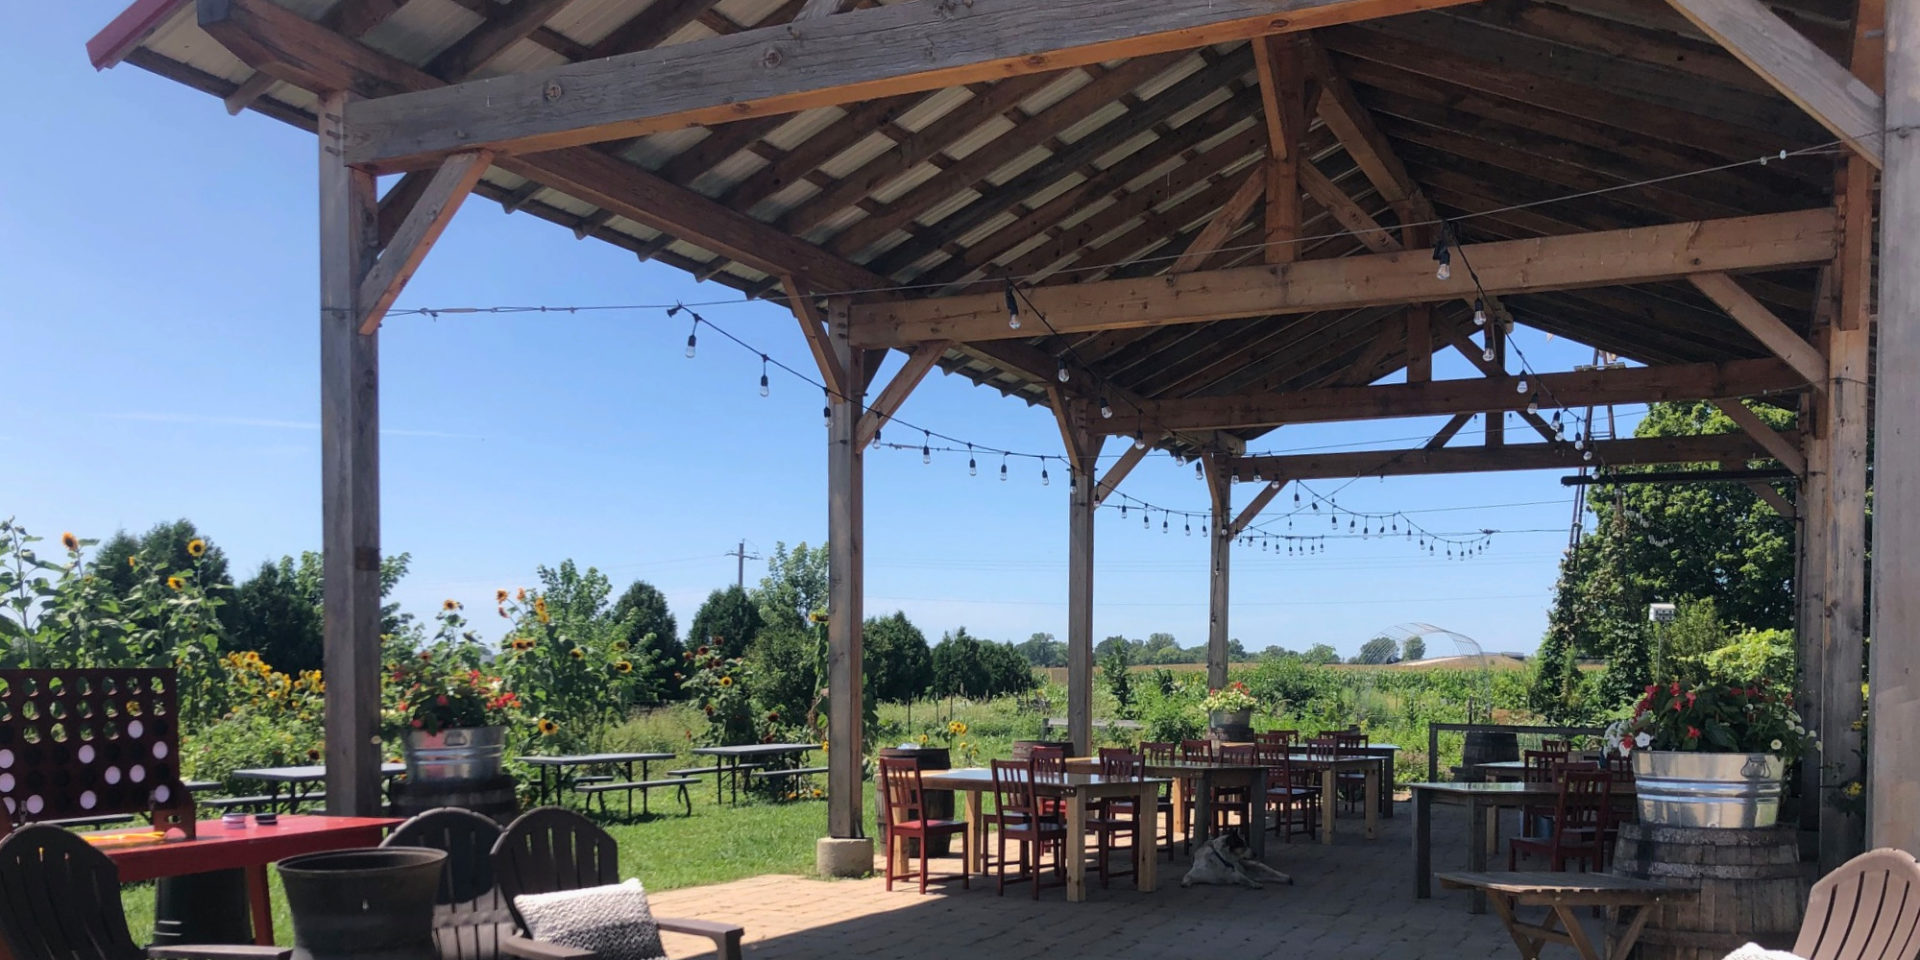 Prairie Fruits Farm in the summer with blooming sunflowers and outdoor dining set up under a covered patio on a blue skied day.